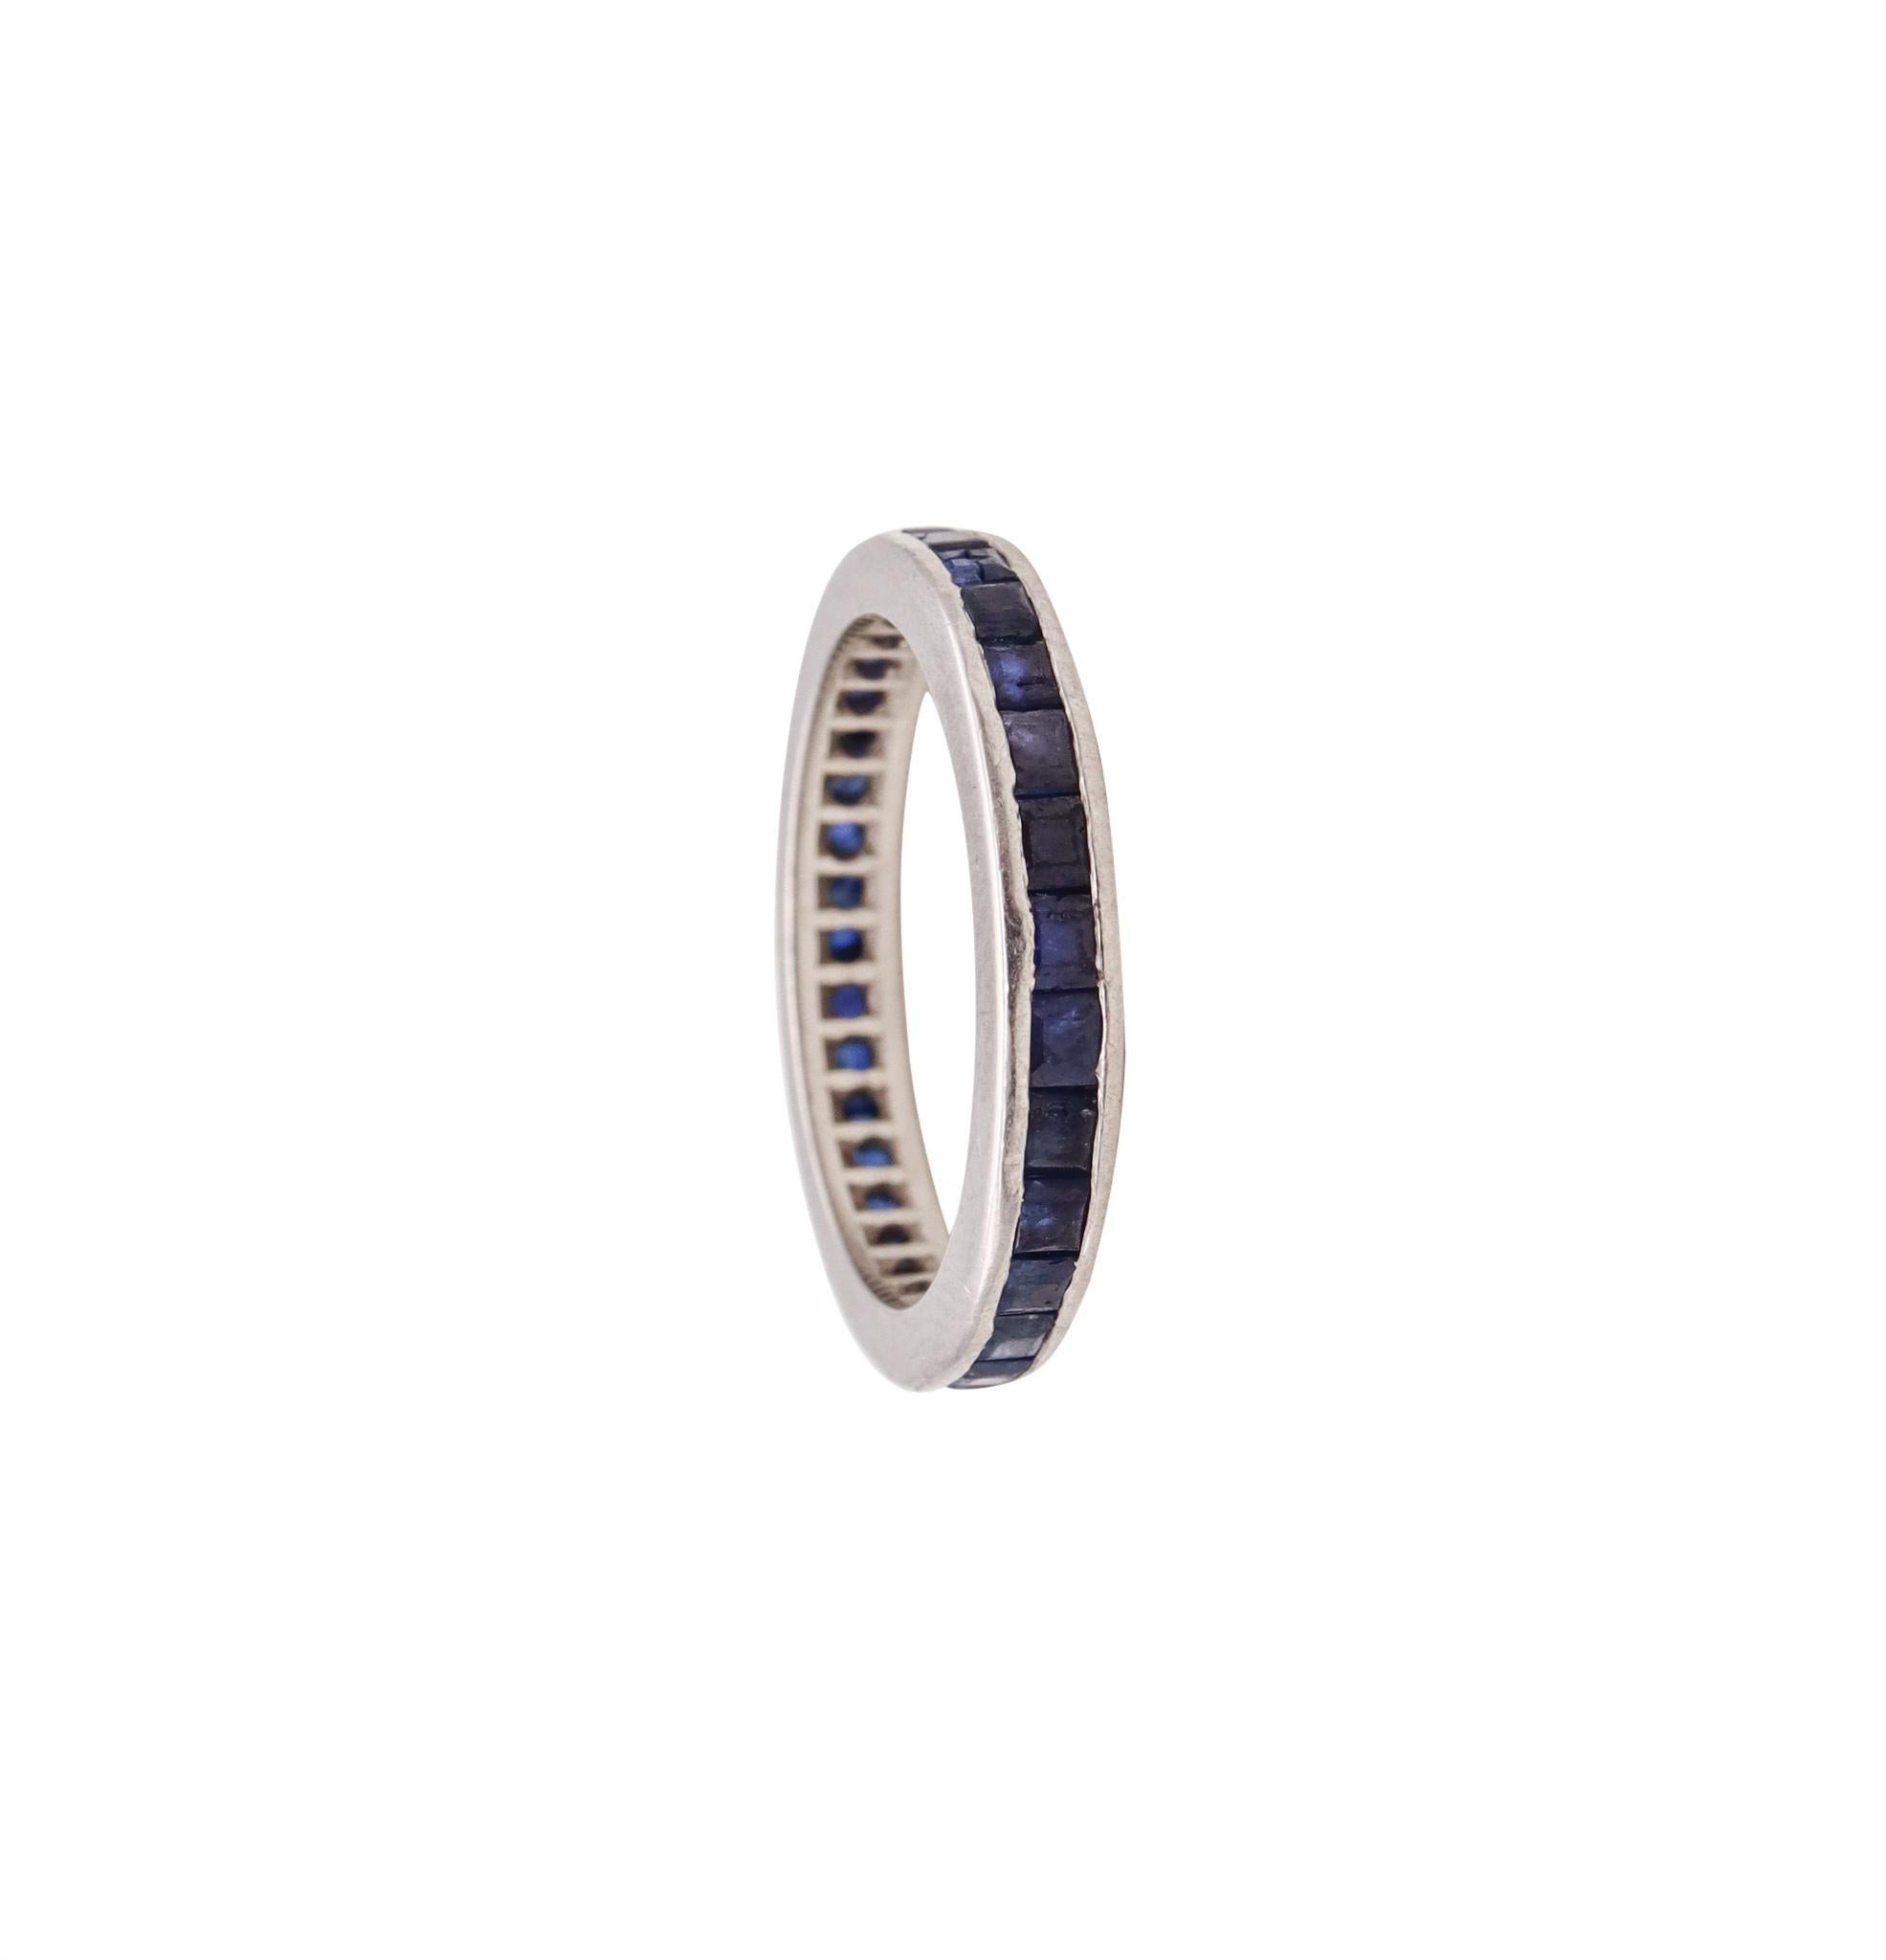 An eternity ring band with Natural Sapphires.

Modern eternity band ring crafted in solid .950/.999 platinum, with high polished finish. Is mounted in a channel setting, with 30 calibrated princess cuts of blue sapphires.

The gemstones are natural,